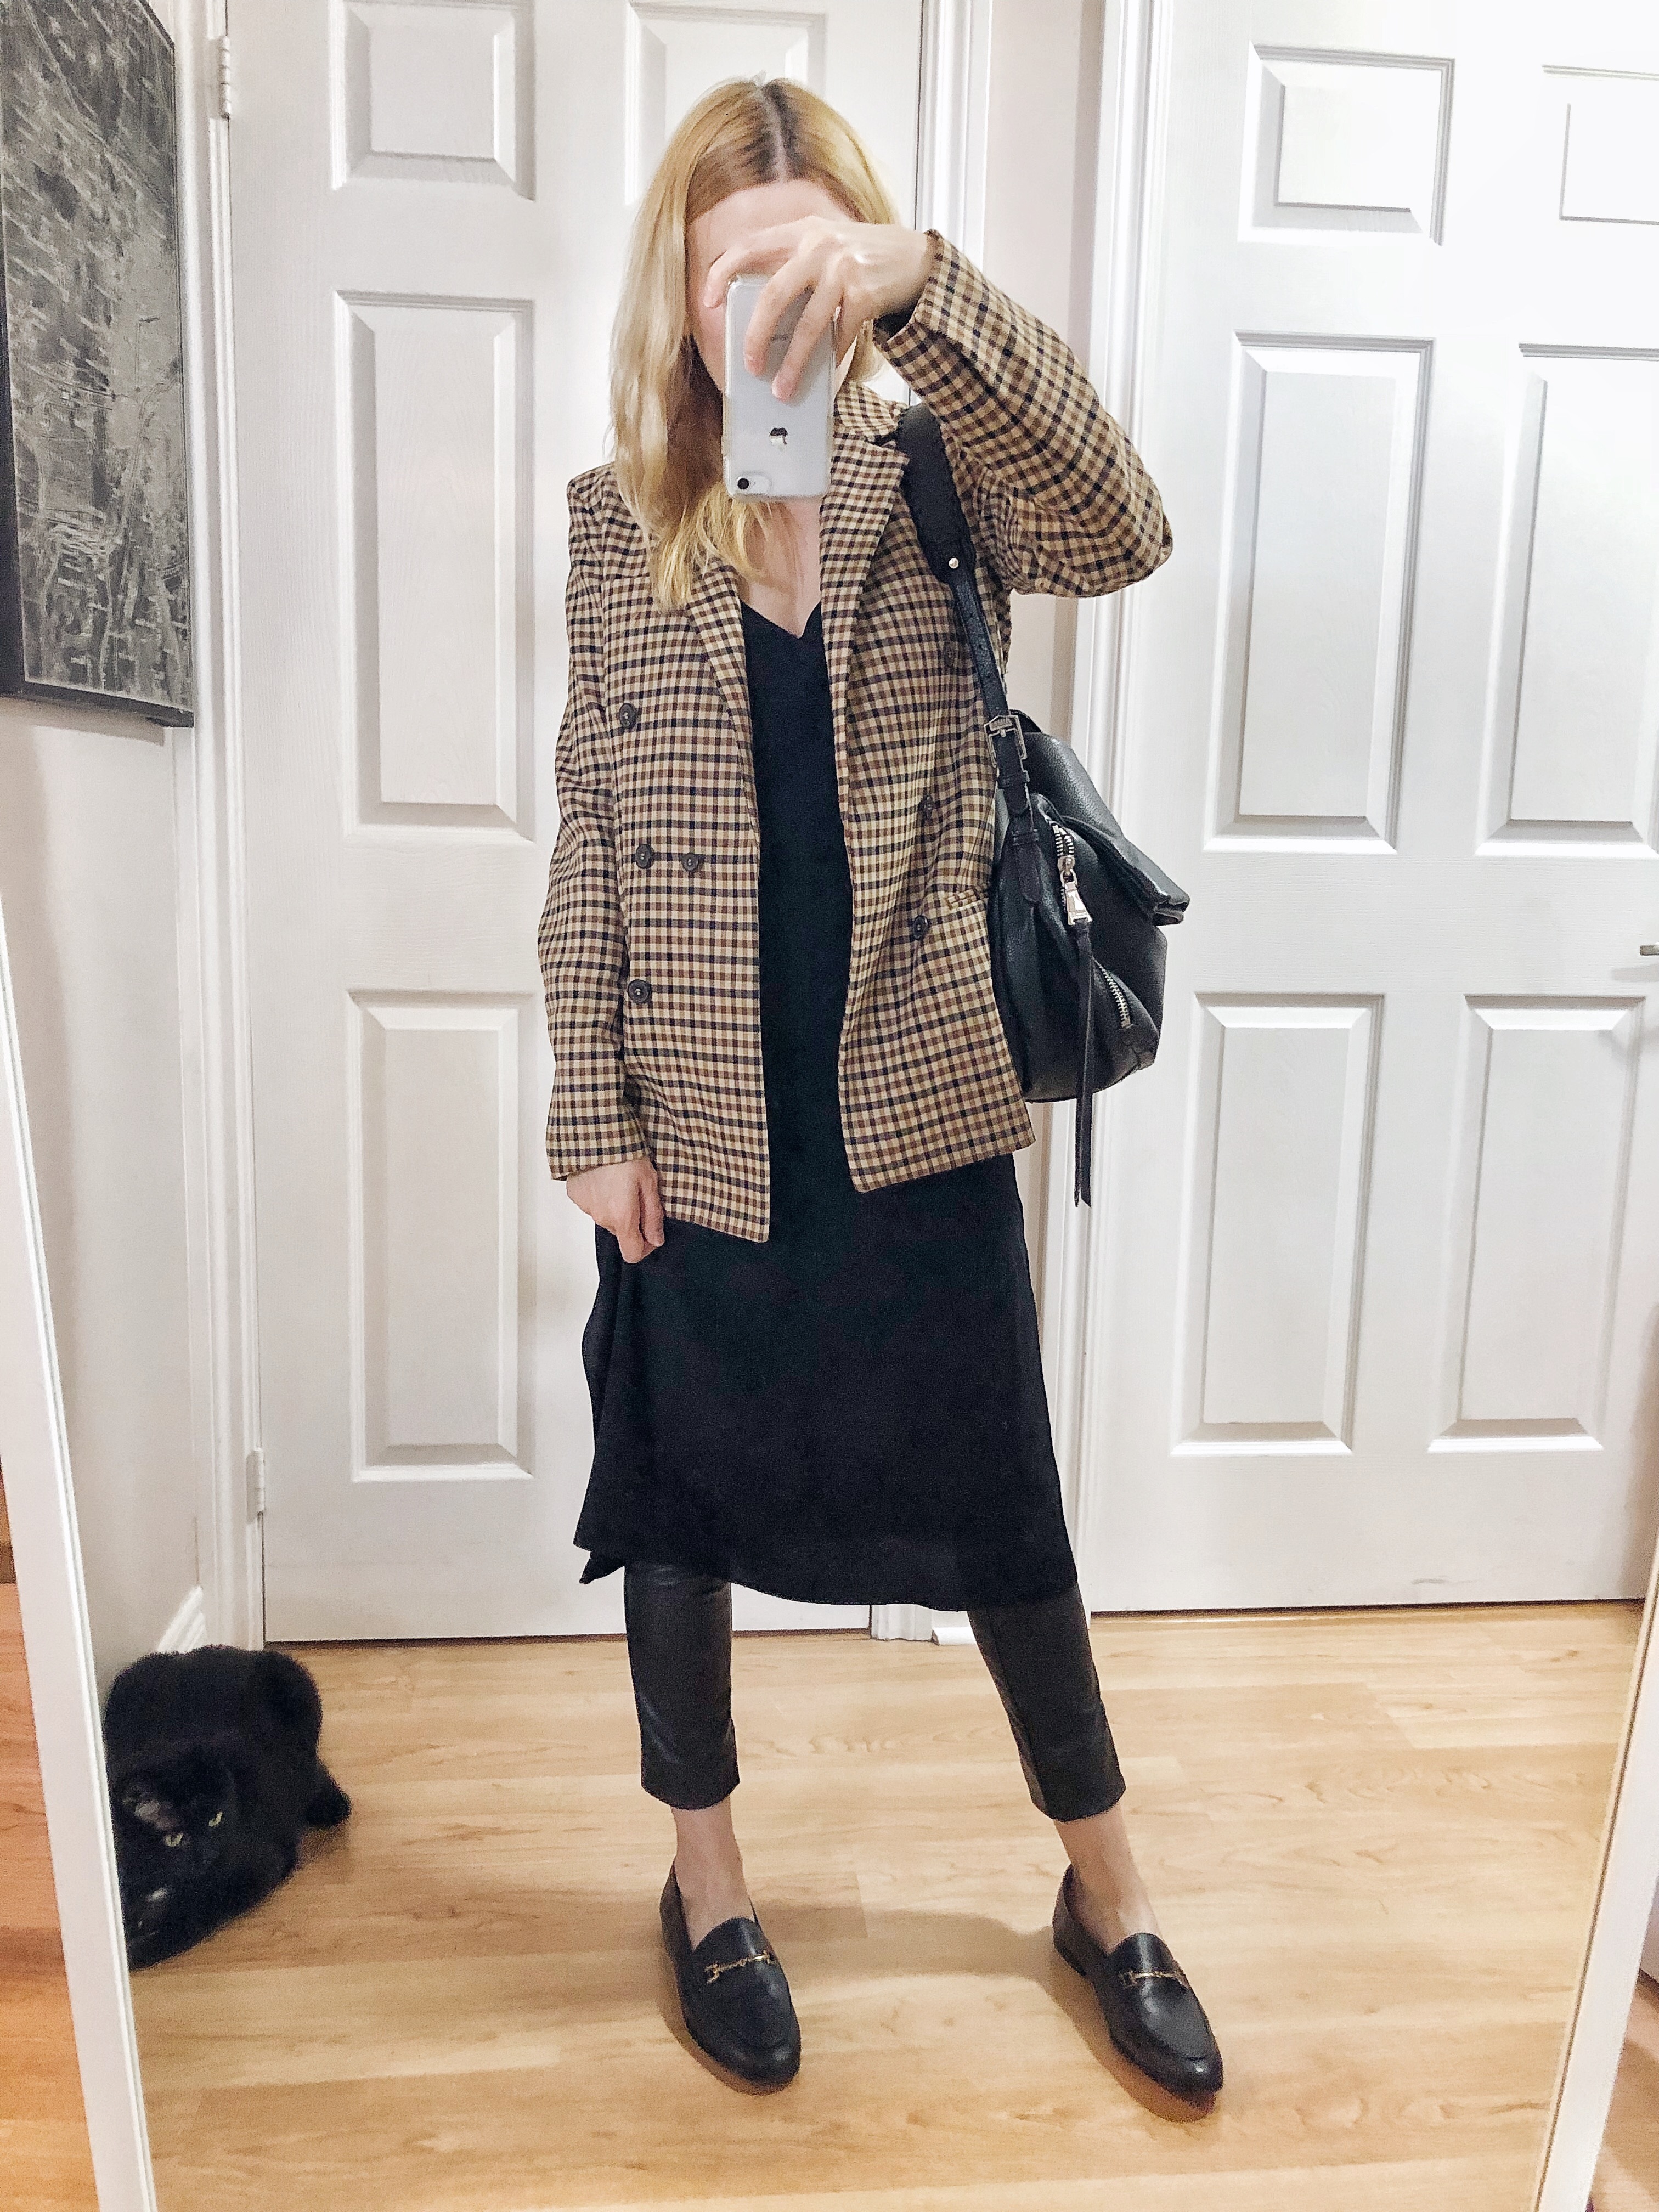 What I Wore. I am wearing a black slip dress, check blazer, black faux leather leggings, and black loafers.